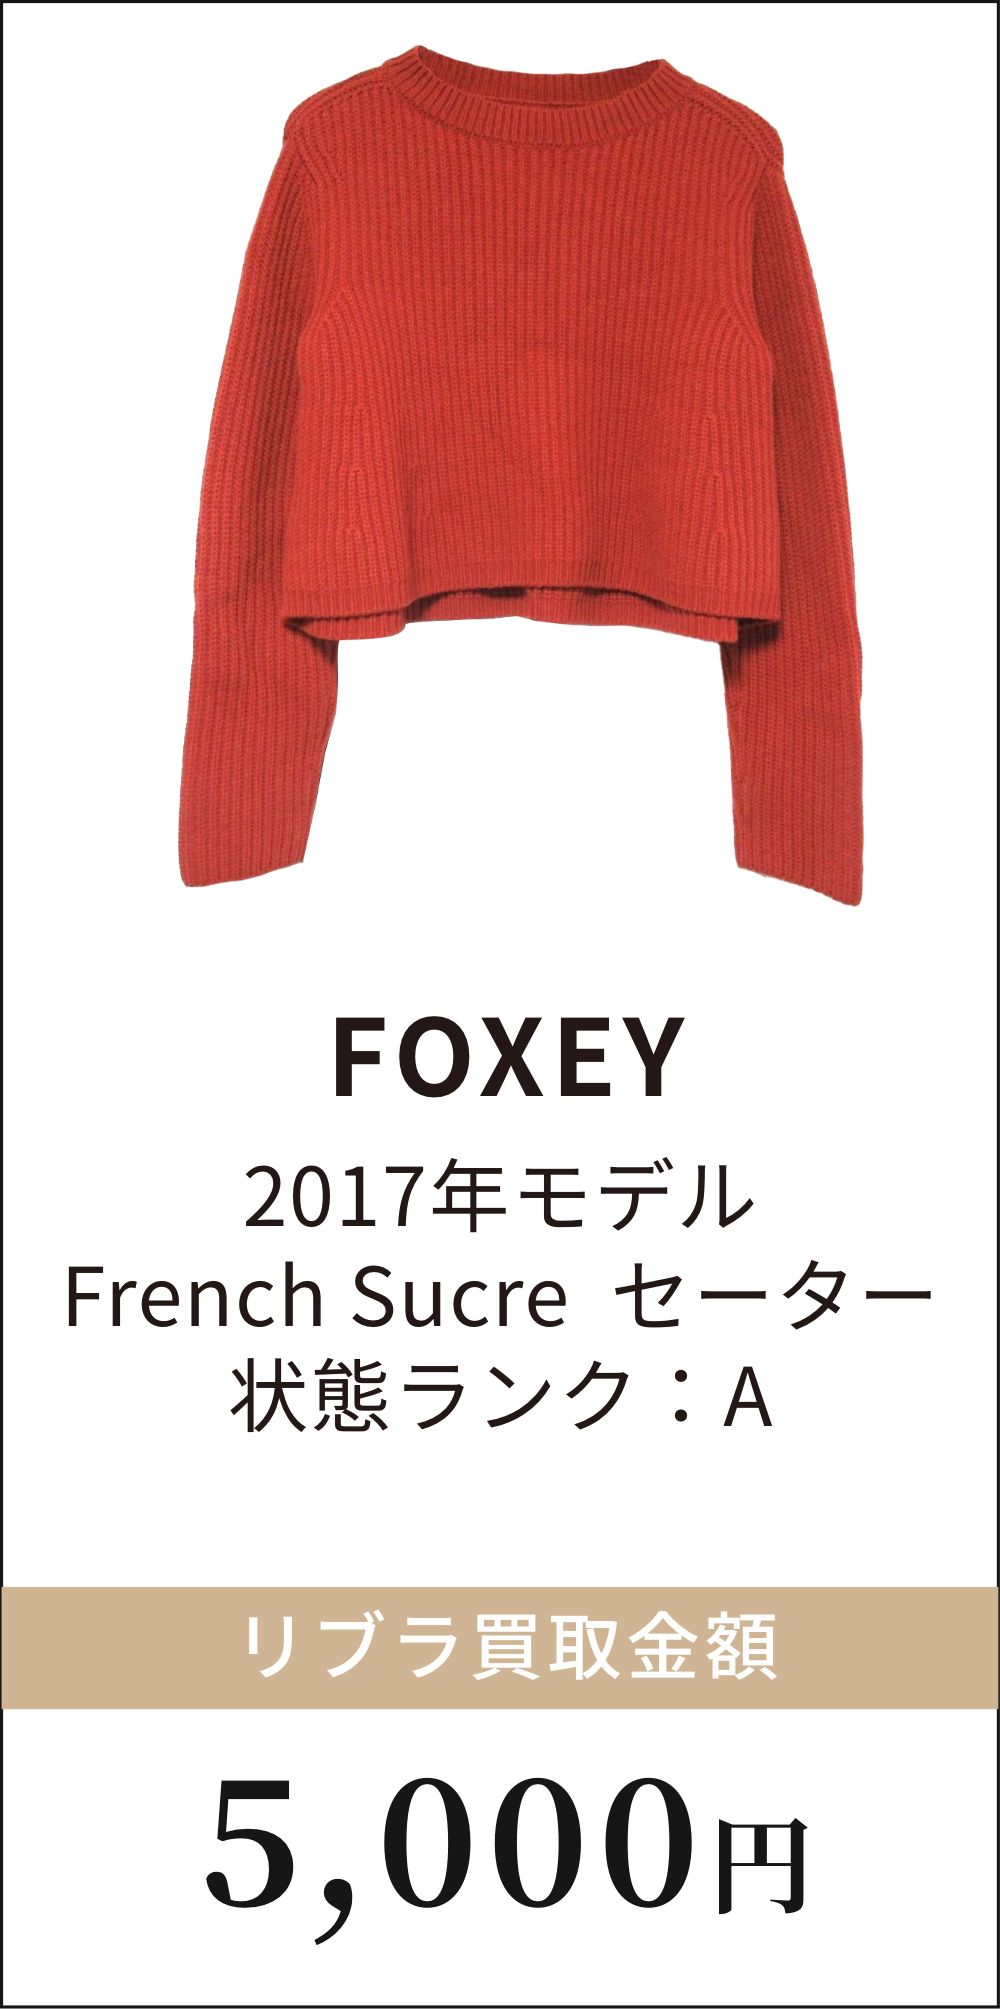 FOXEY 2017年モデル French Sucre セーター